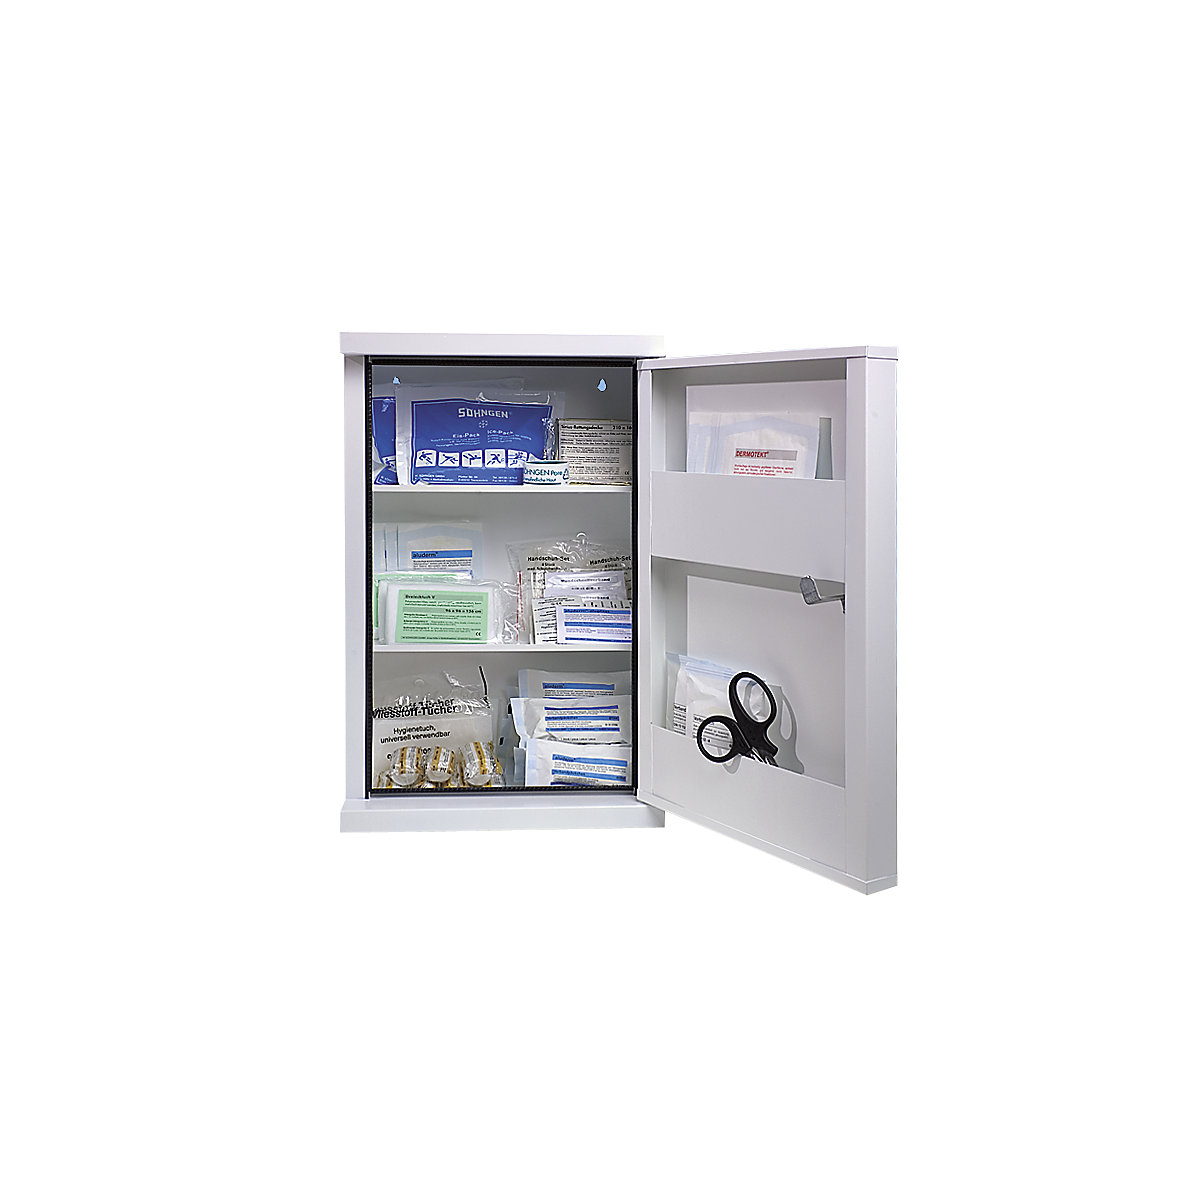 SÖHNGEN – First aid cupboard, DIN 13169, single door, white, HxWxD 560 x 360 x 200 mm, with contents